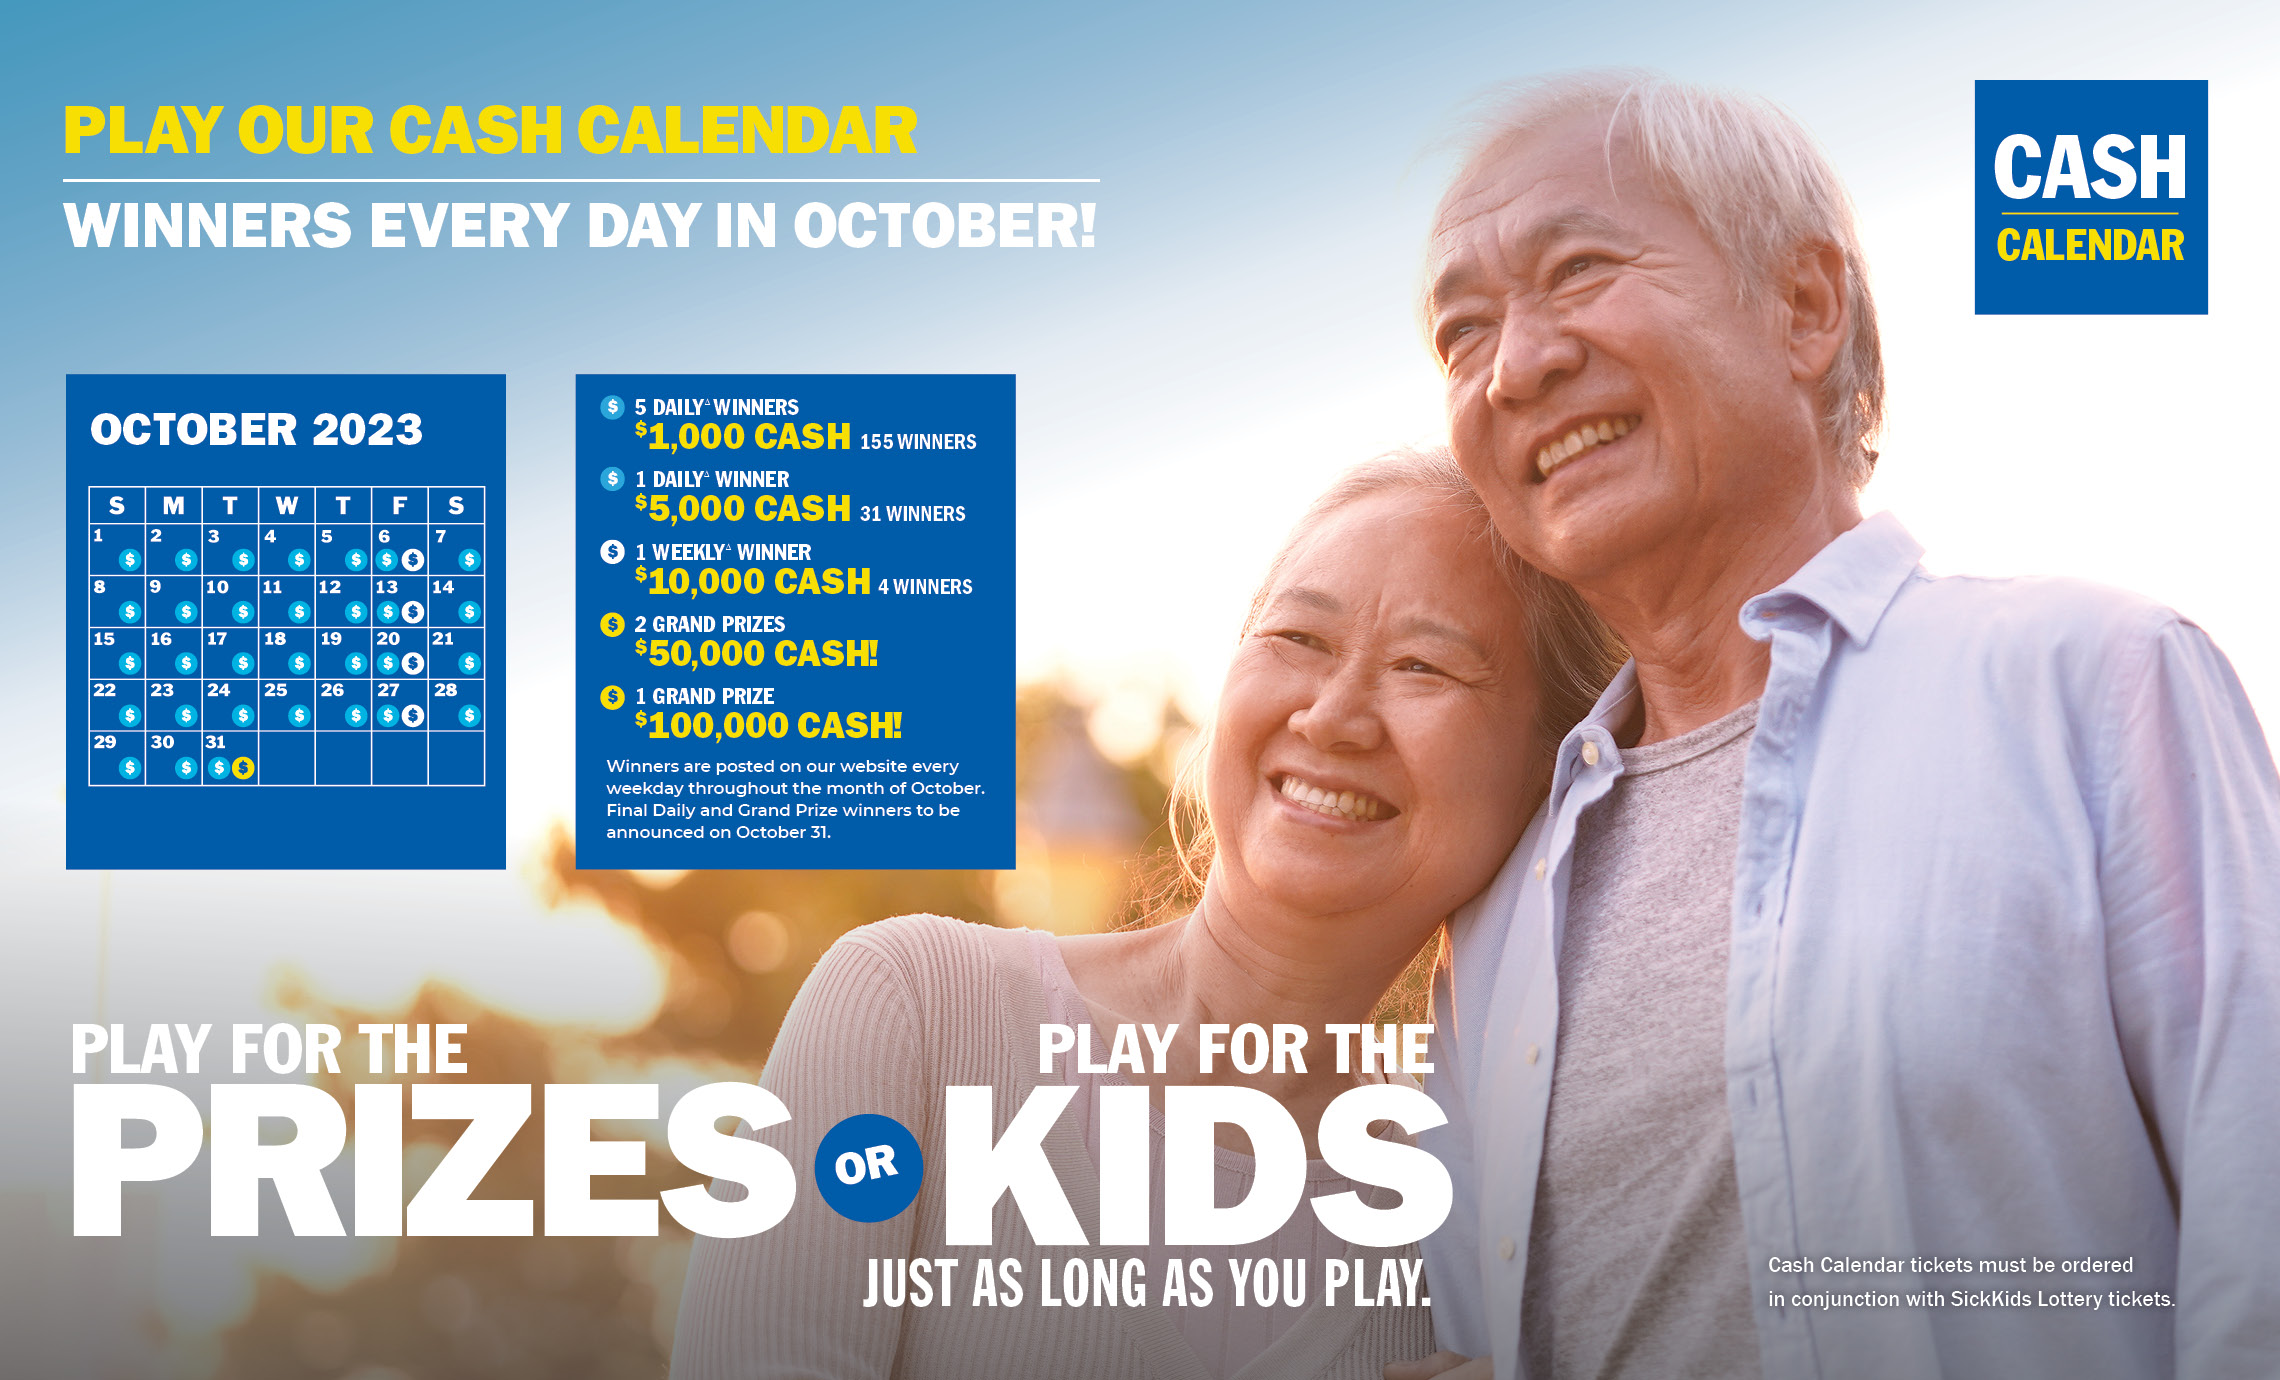 PLAY OUR CASH CALENDAR - WINNERS EVERY DAY IN OCTOBER!